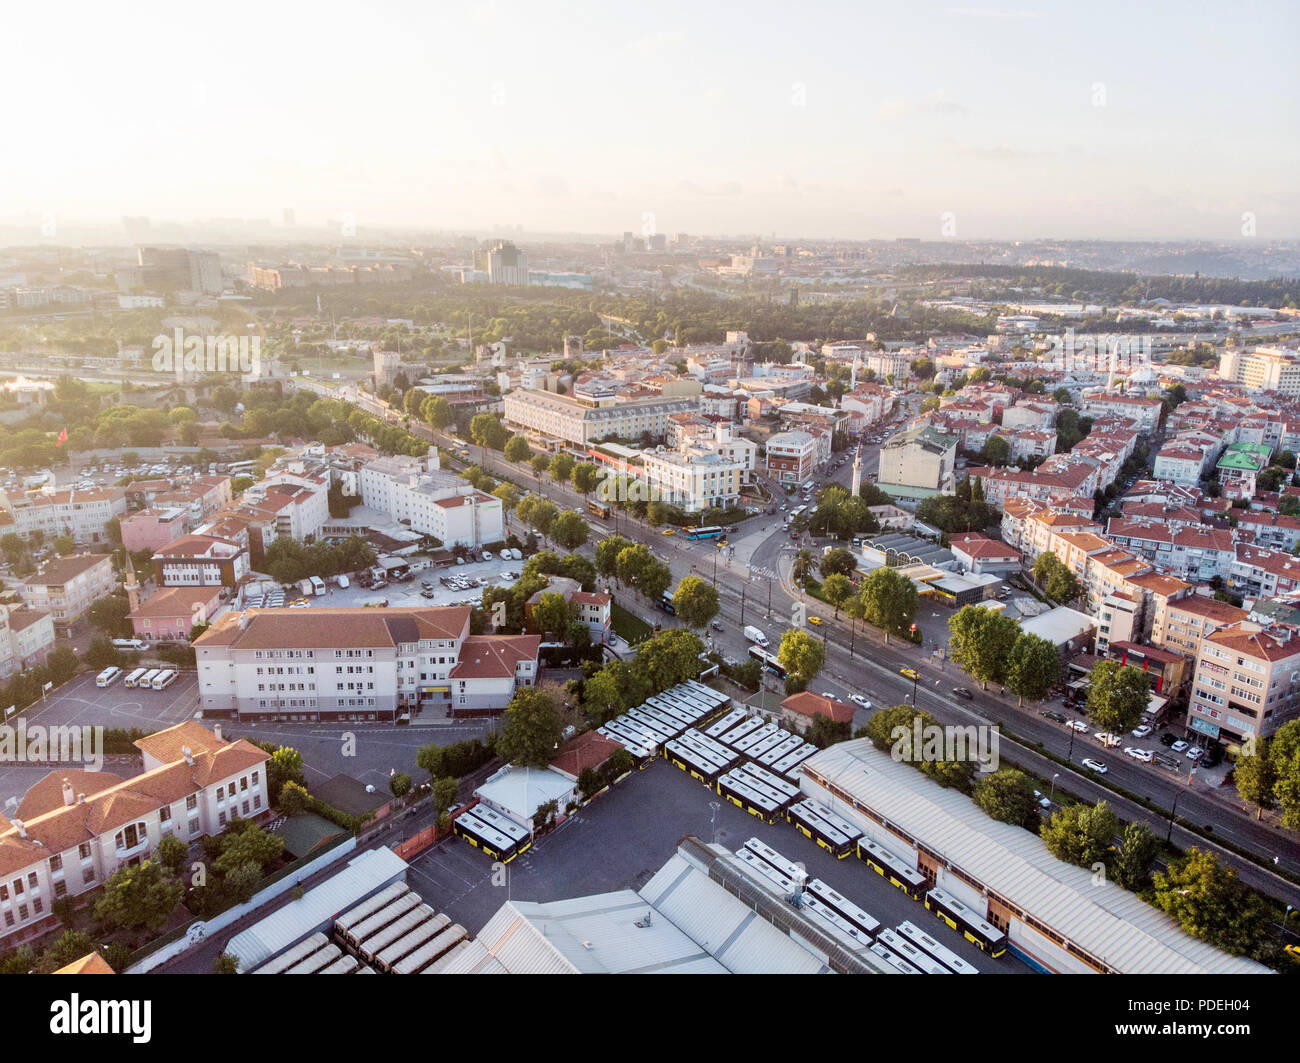 Aerial Drone View of Istanbul Millet Caddesi / Sehremini Aksaray Bus Station. Cityscape. Stock Photo